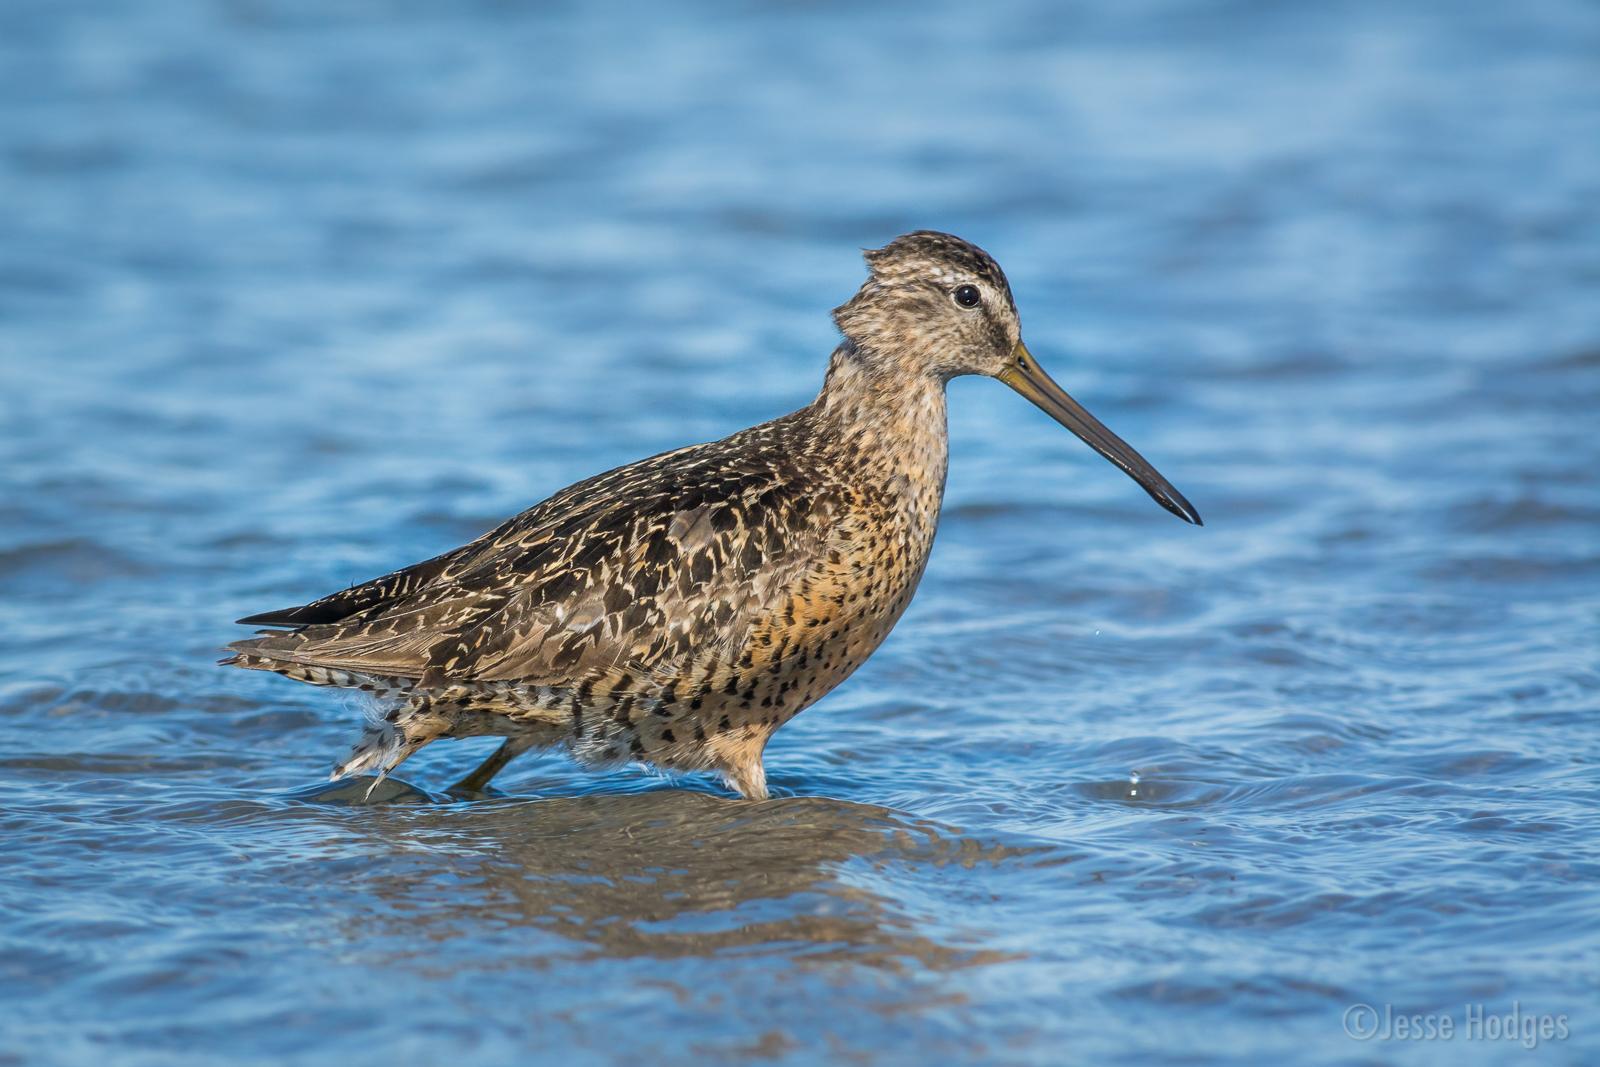 Short-billed Dowitcher Photo by Jesse Hodges